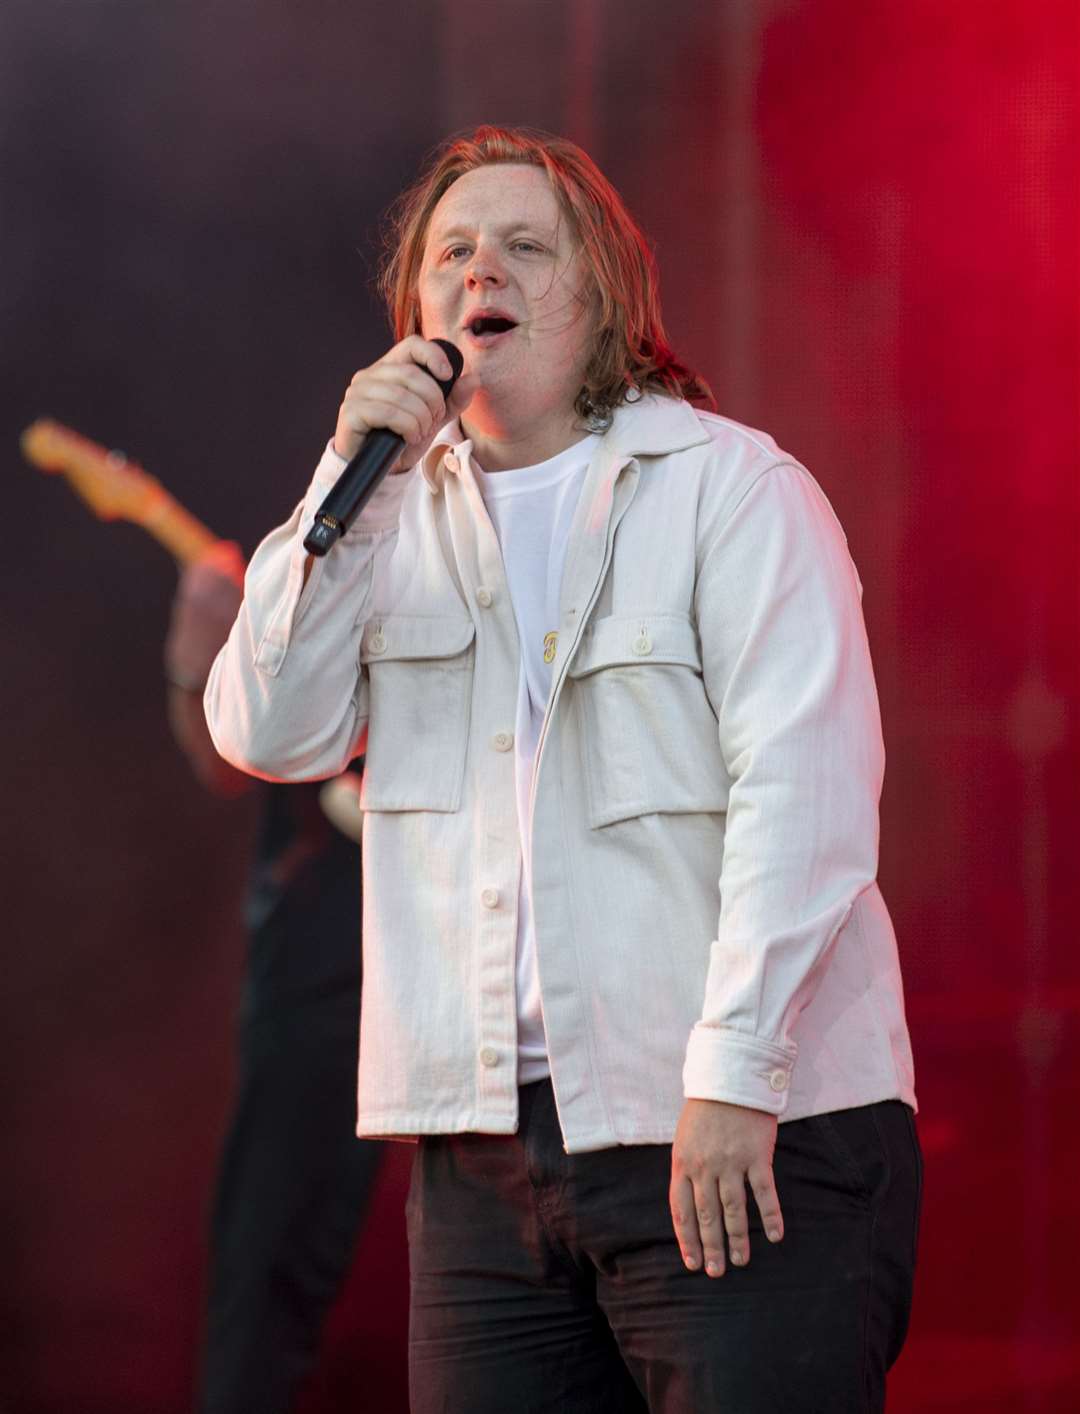 Lewis Capaldi performed at the well-attended festival (PA)